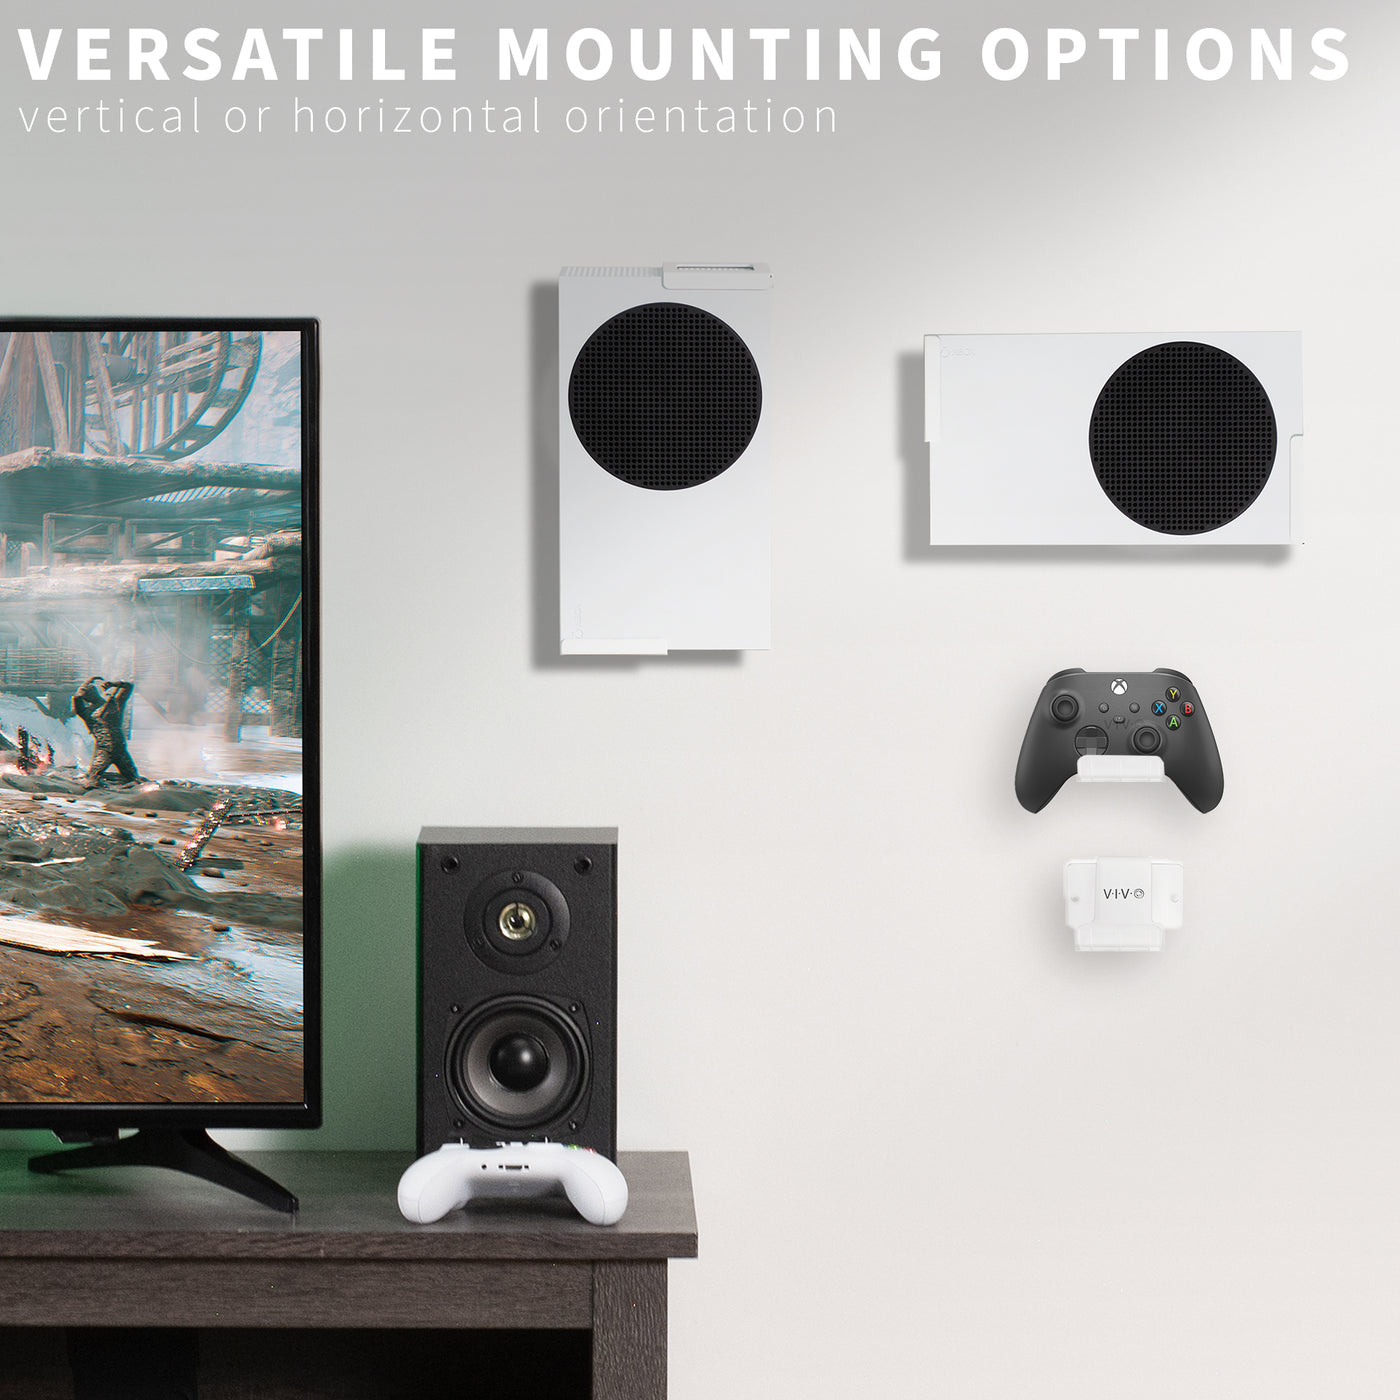 Xbox mount with many setup options and landscape or portrait orientation.